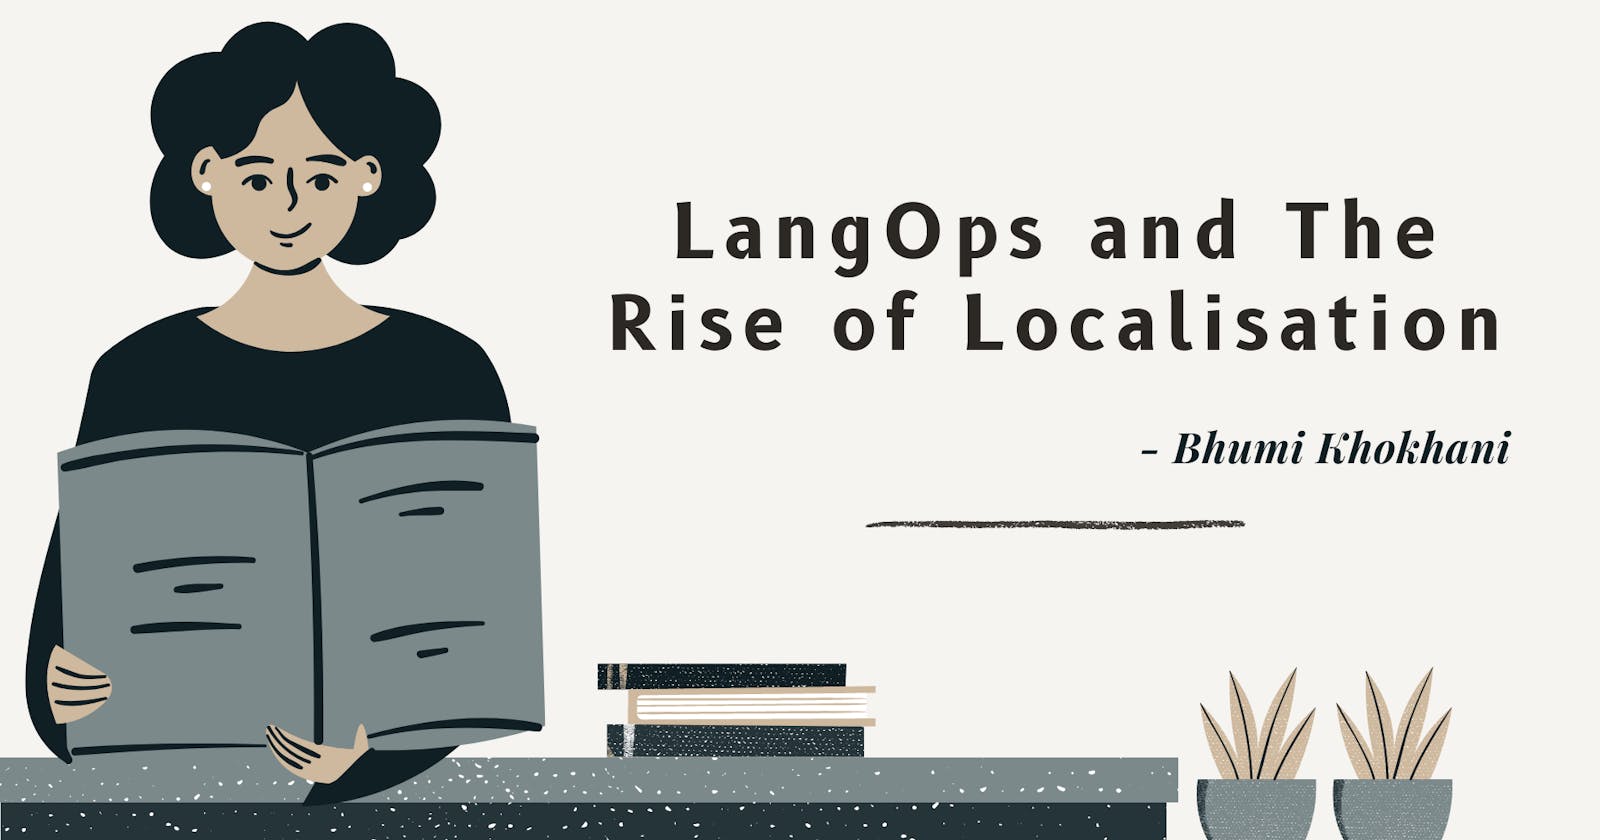 LangOps and The Rise of Localisation